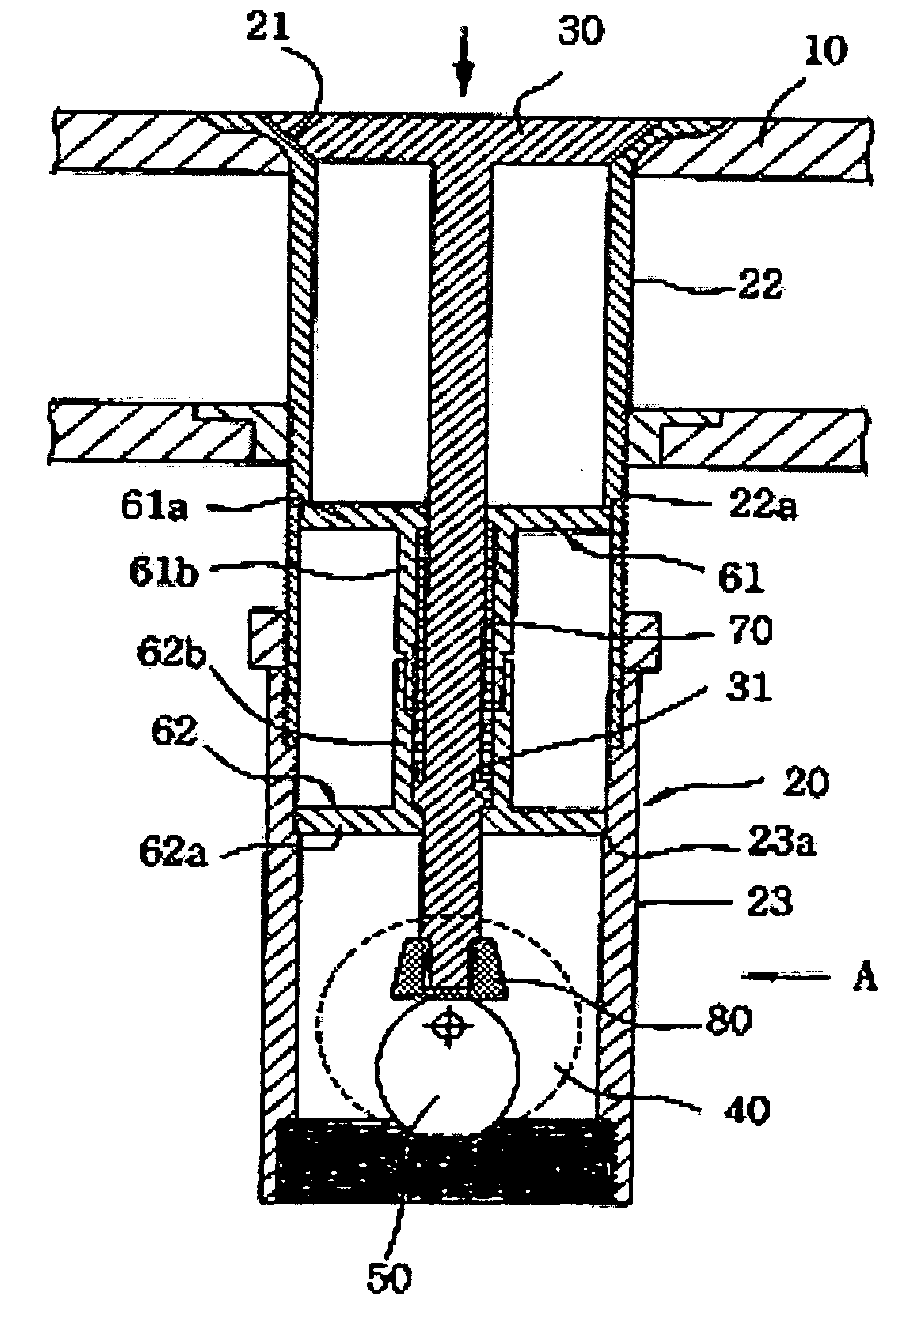 Apparatus for automatically operating a drain valve in a washstand